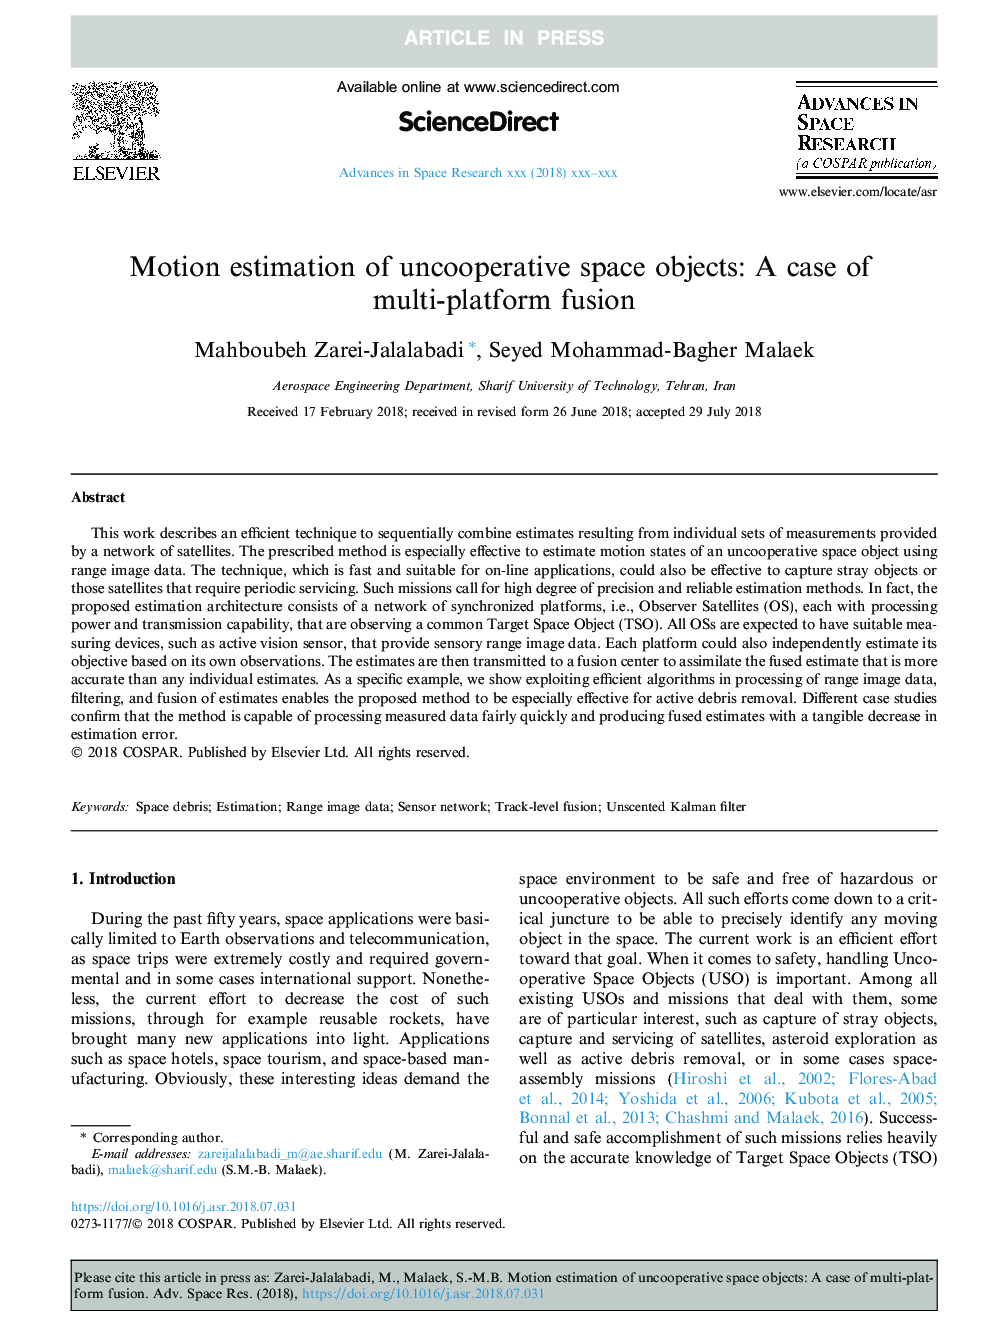 Motion estimation of uncooperative space objects: A case of multi-platform fusion